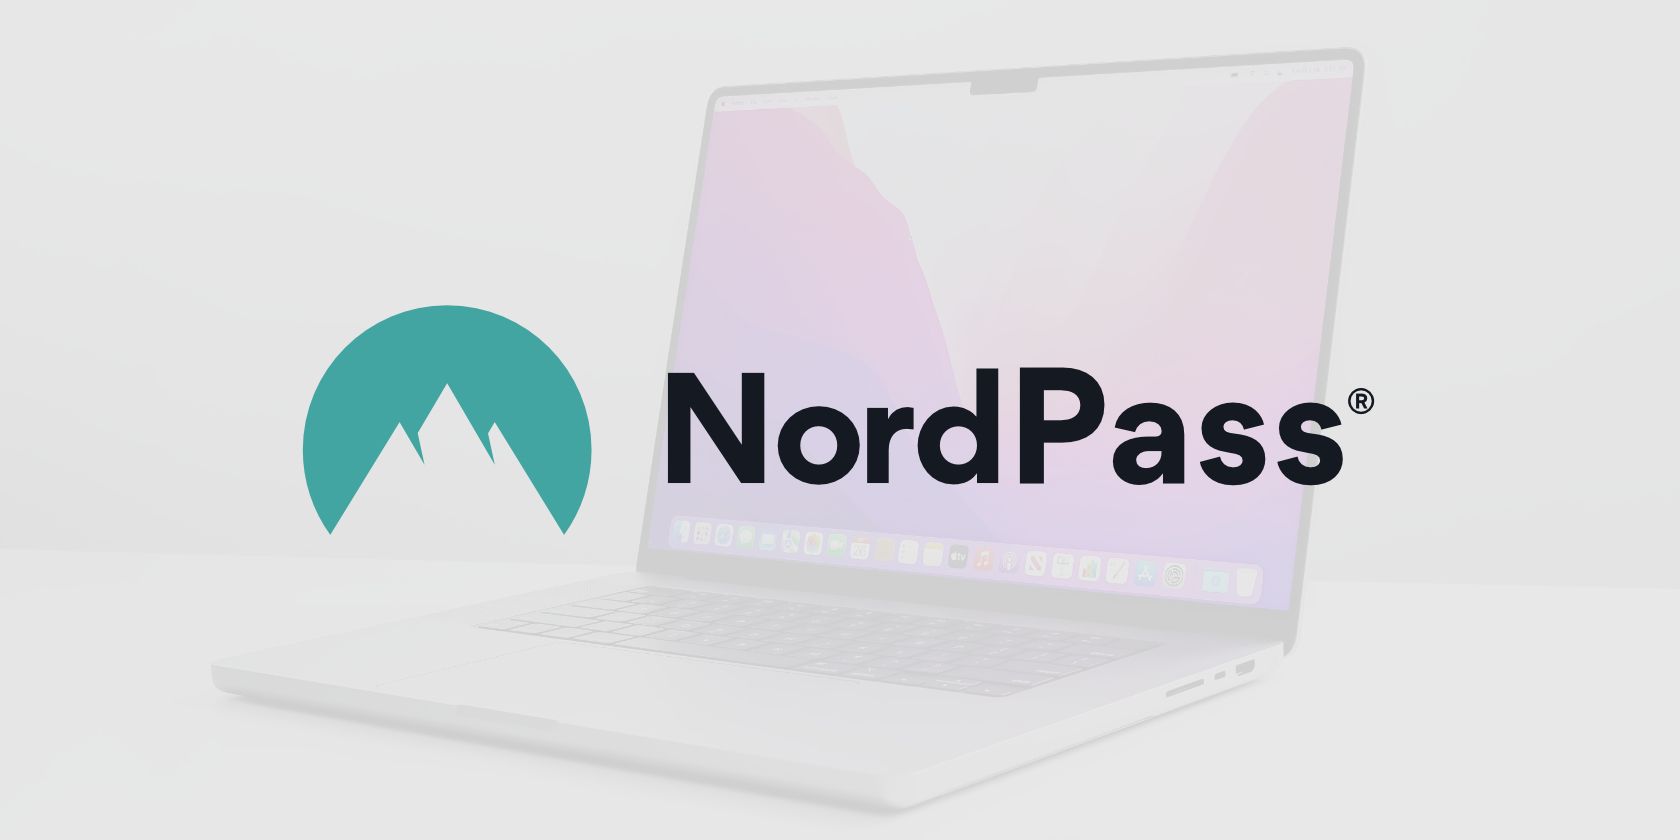 Why Does NordPass Keep Asking Me for My Master Password?